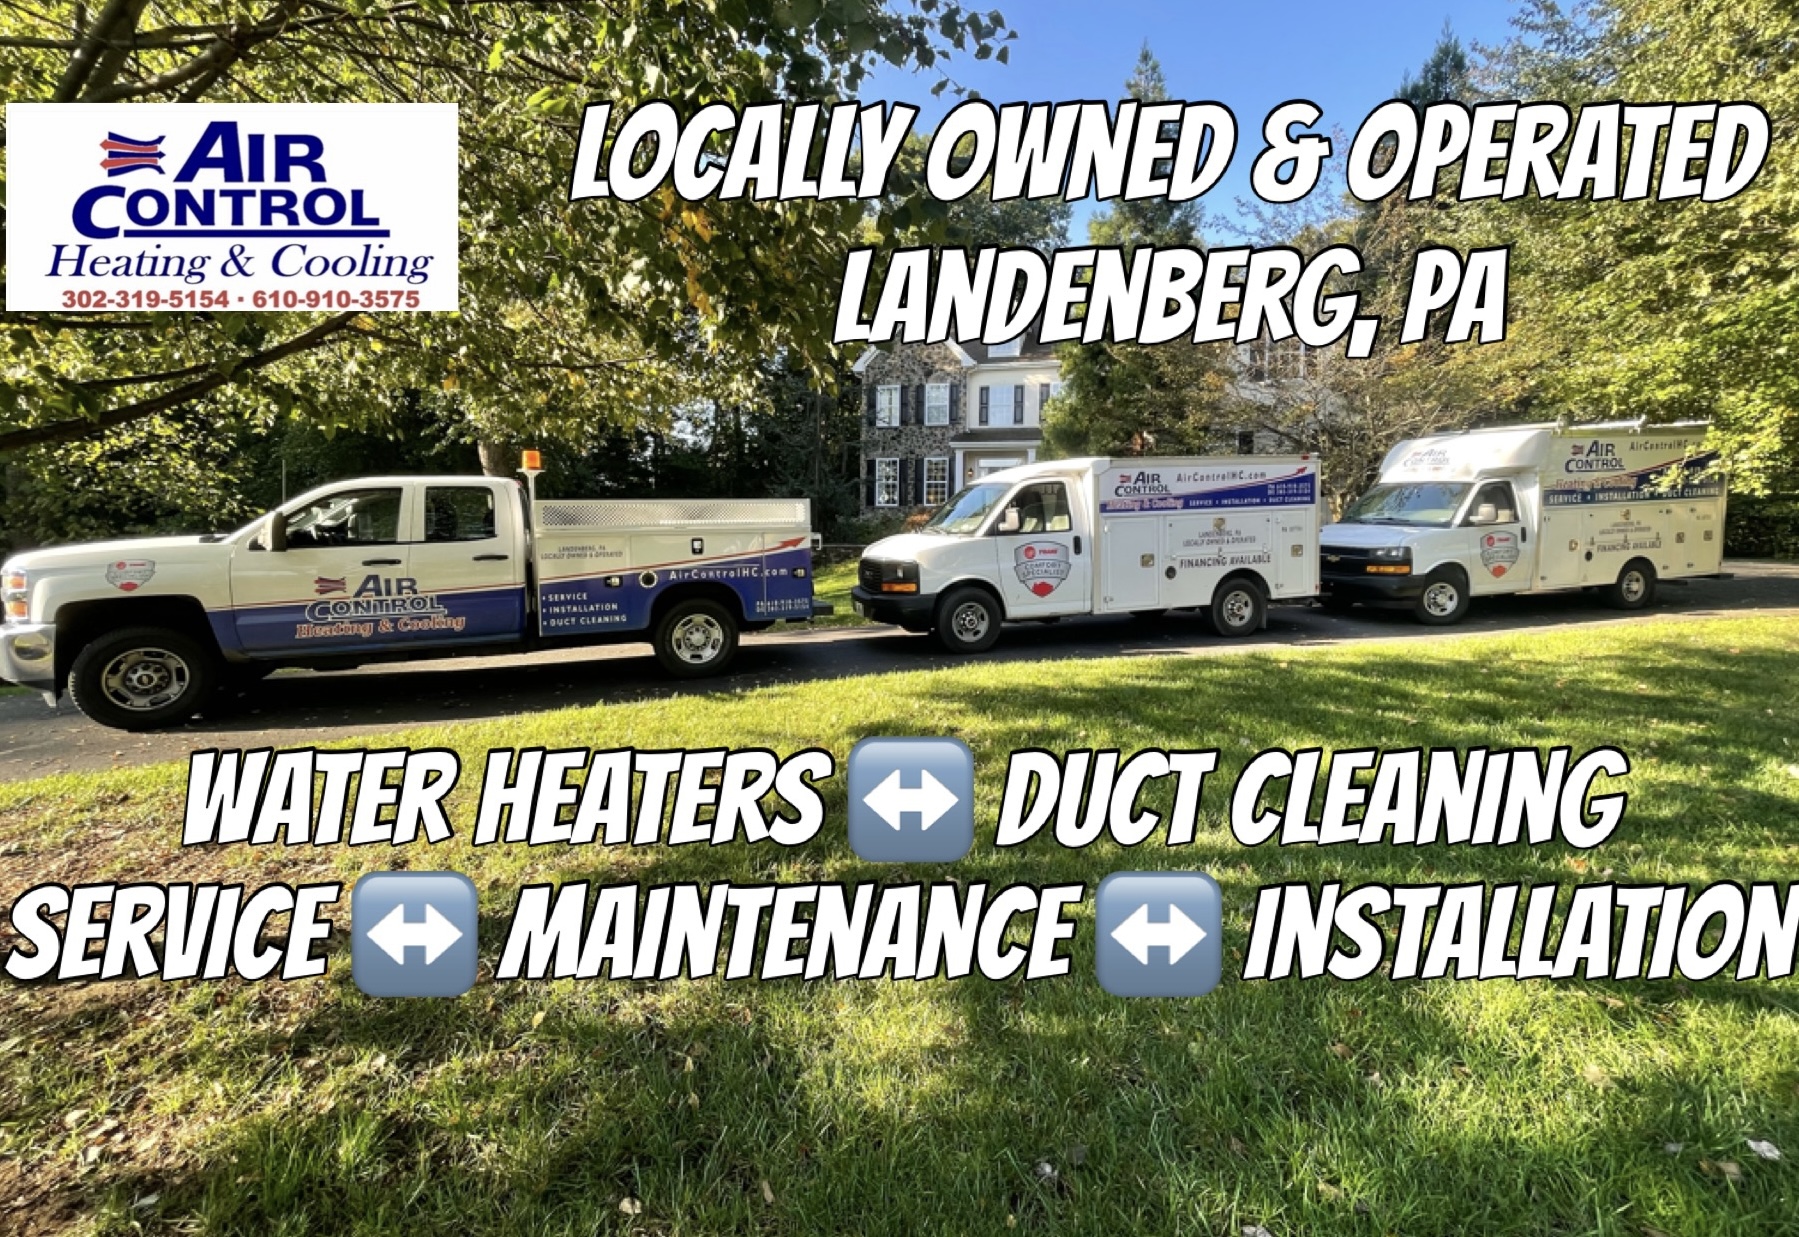 Air Control Heating & Cooling Services